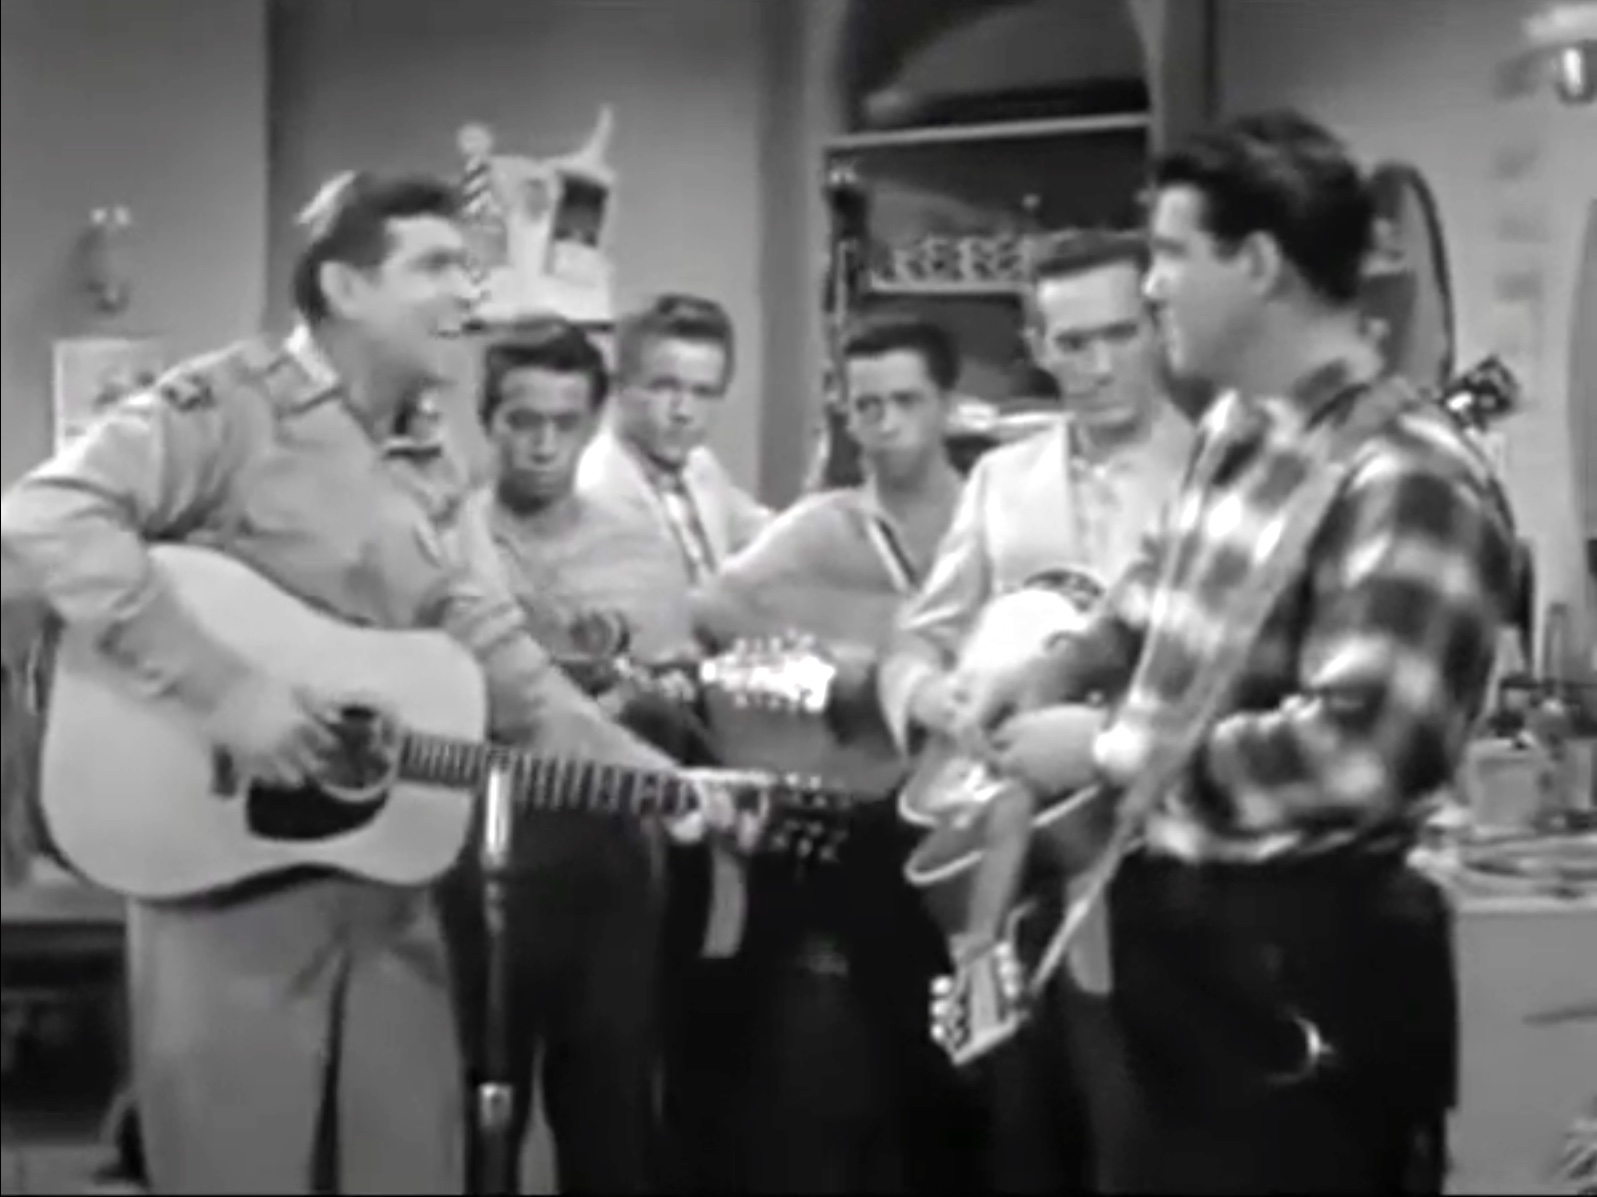 Song lyrics to Flop Eared Mule, Written by J. Baird. Performed by Andy Griffith and The Country Boys in The Andy Griffith Show episode, Mayberry on Record